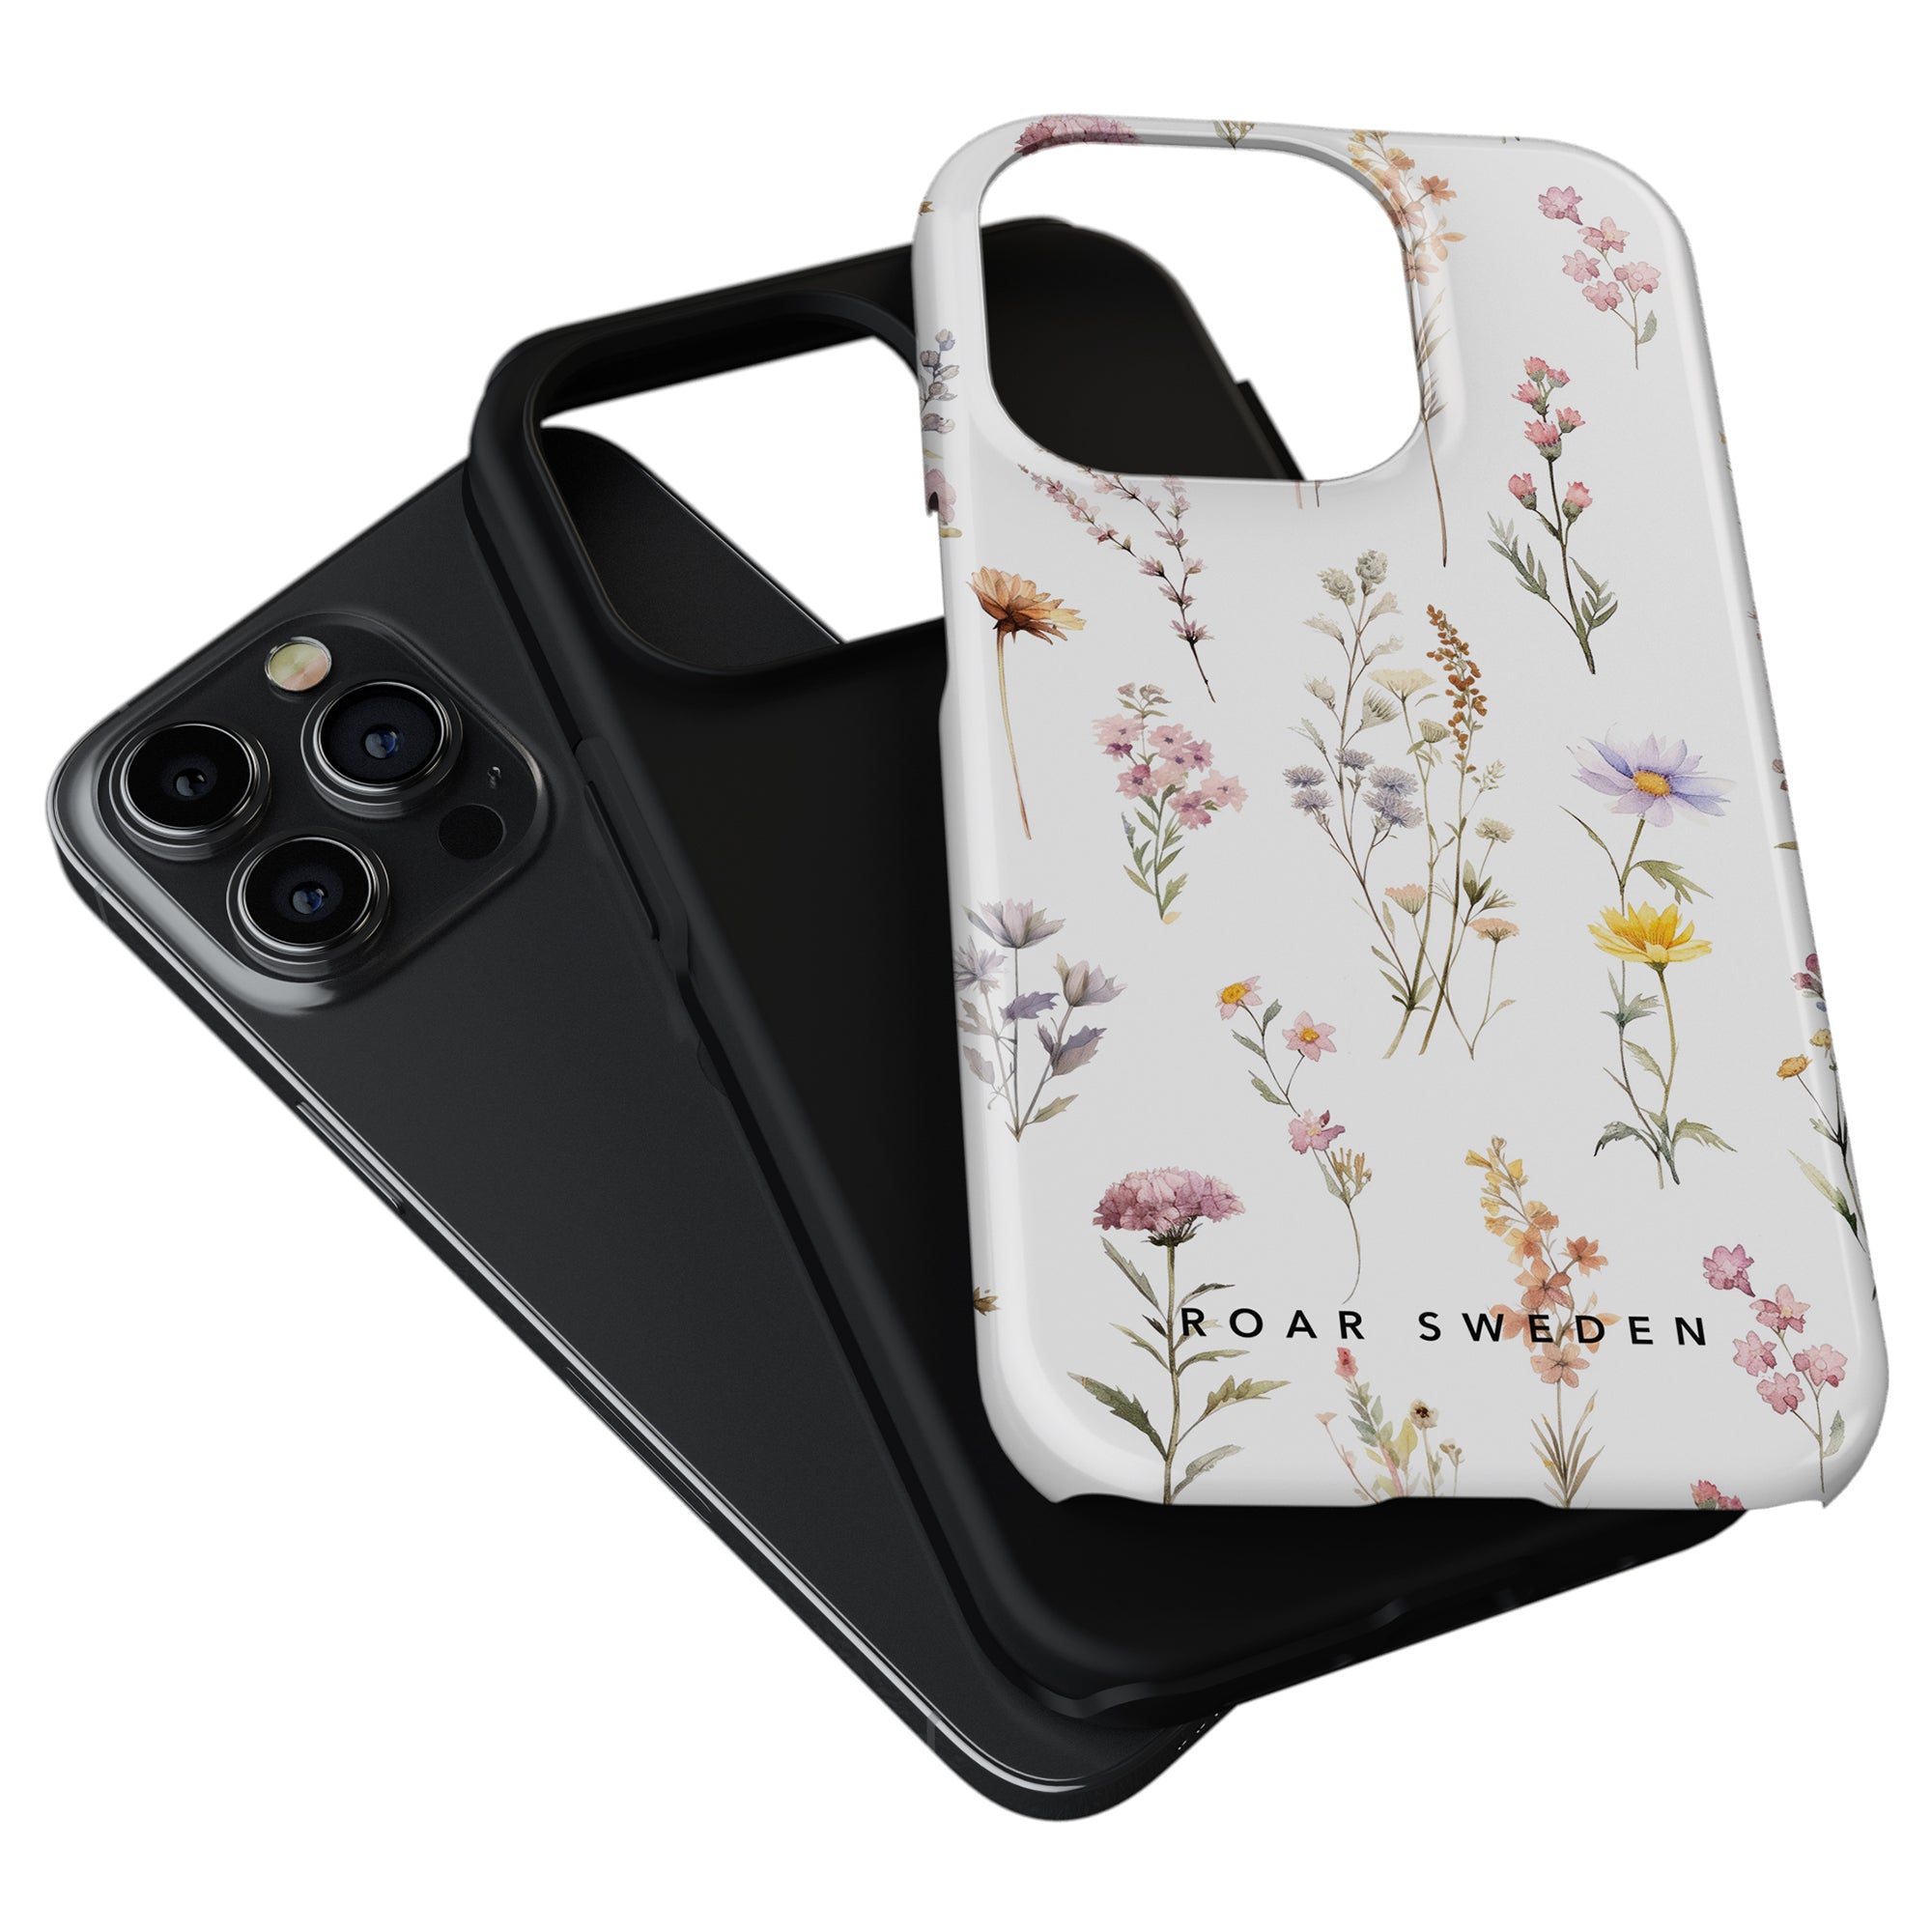 Wild Flowers - Tough Case smartphone with a triple-lens camera beside a luxury floral-print phone case.